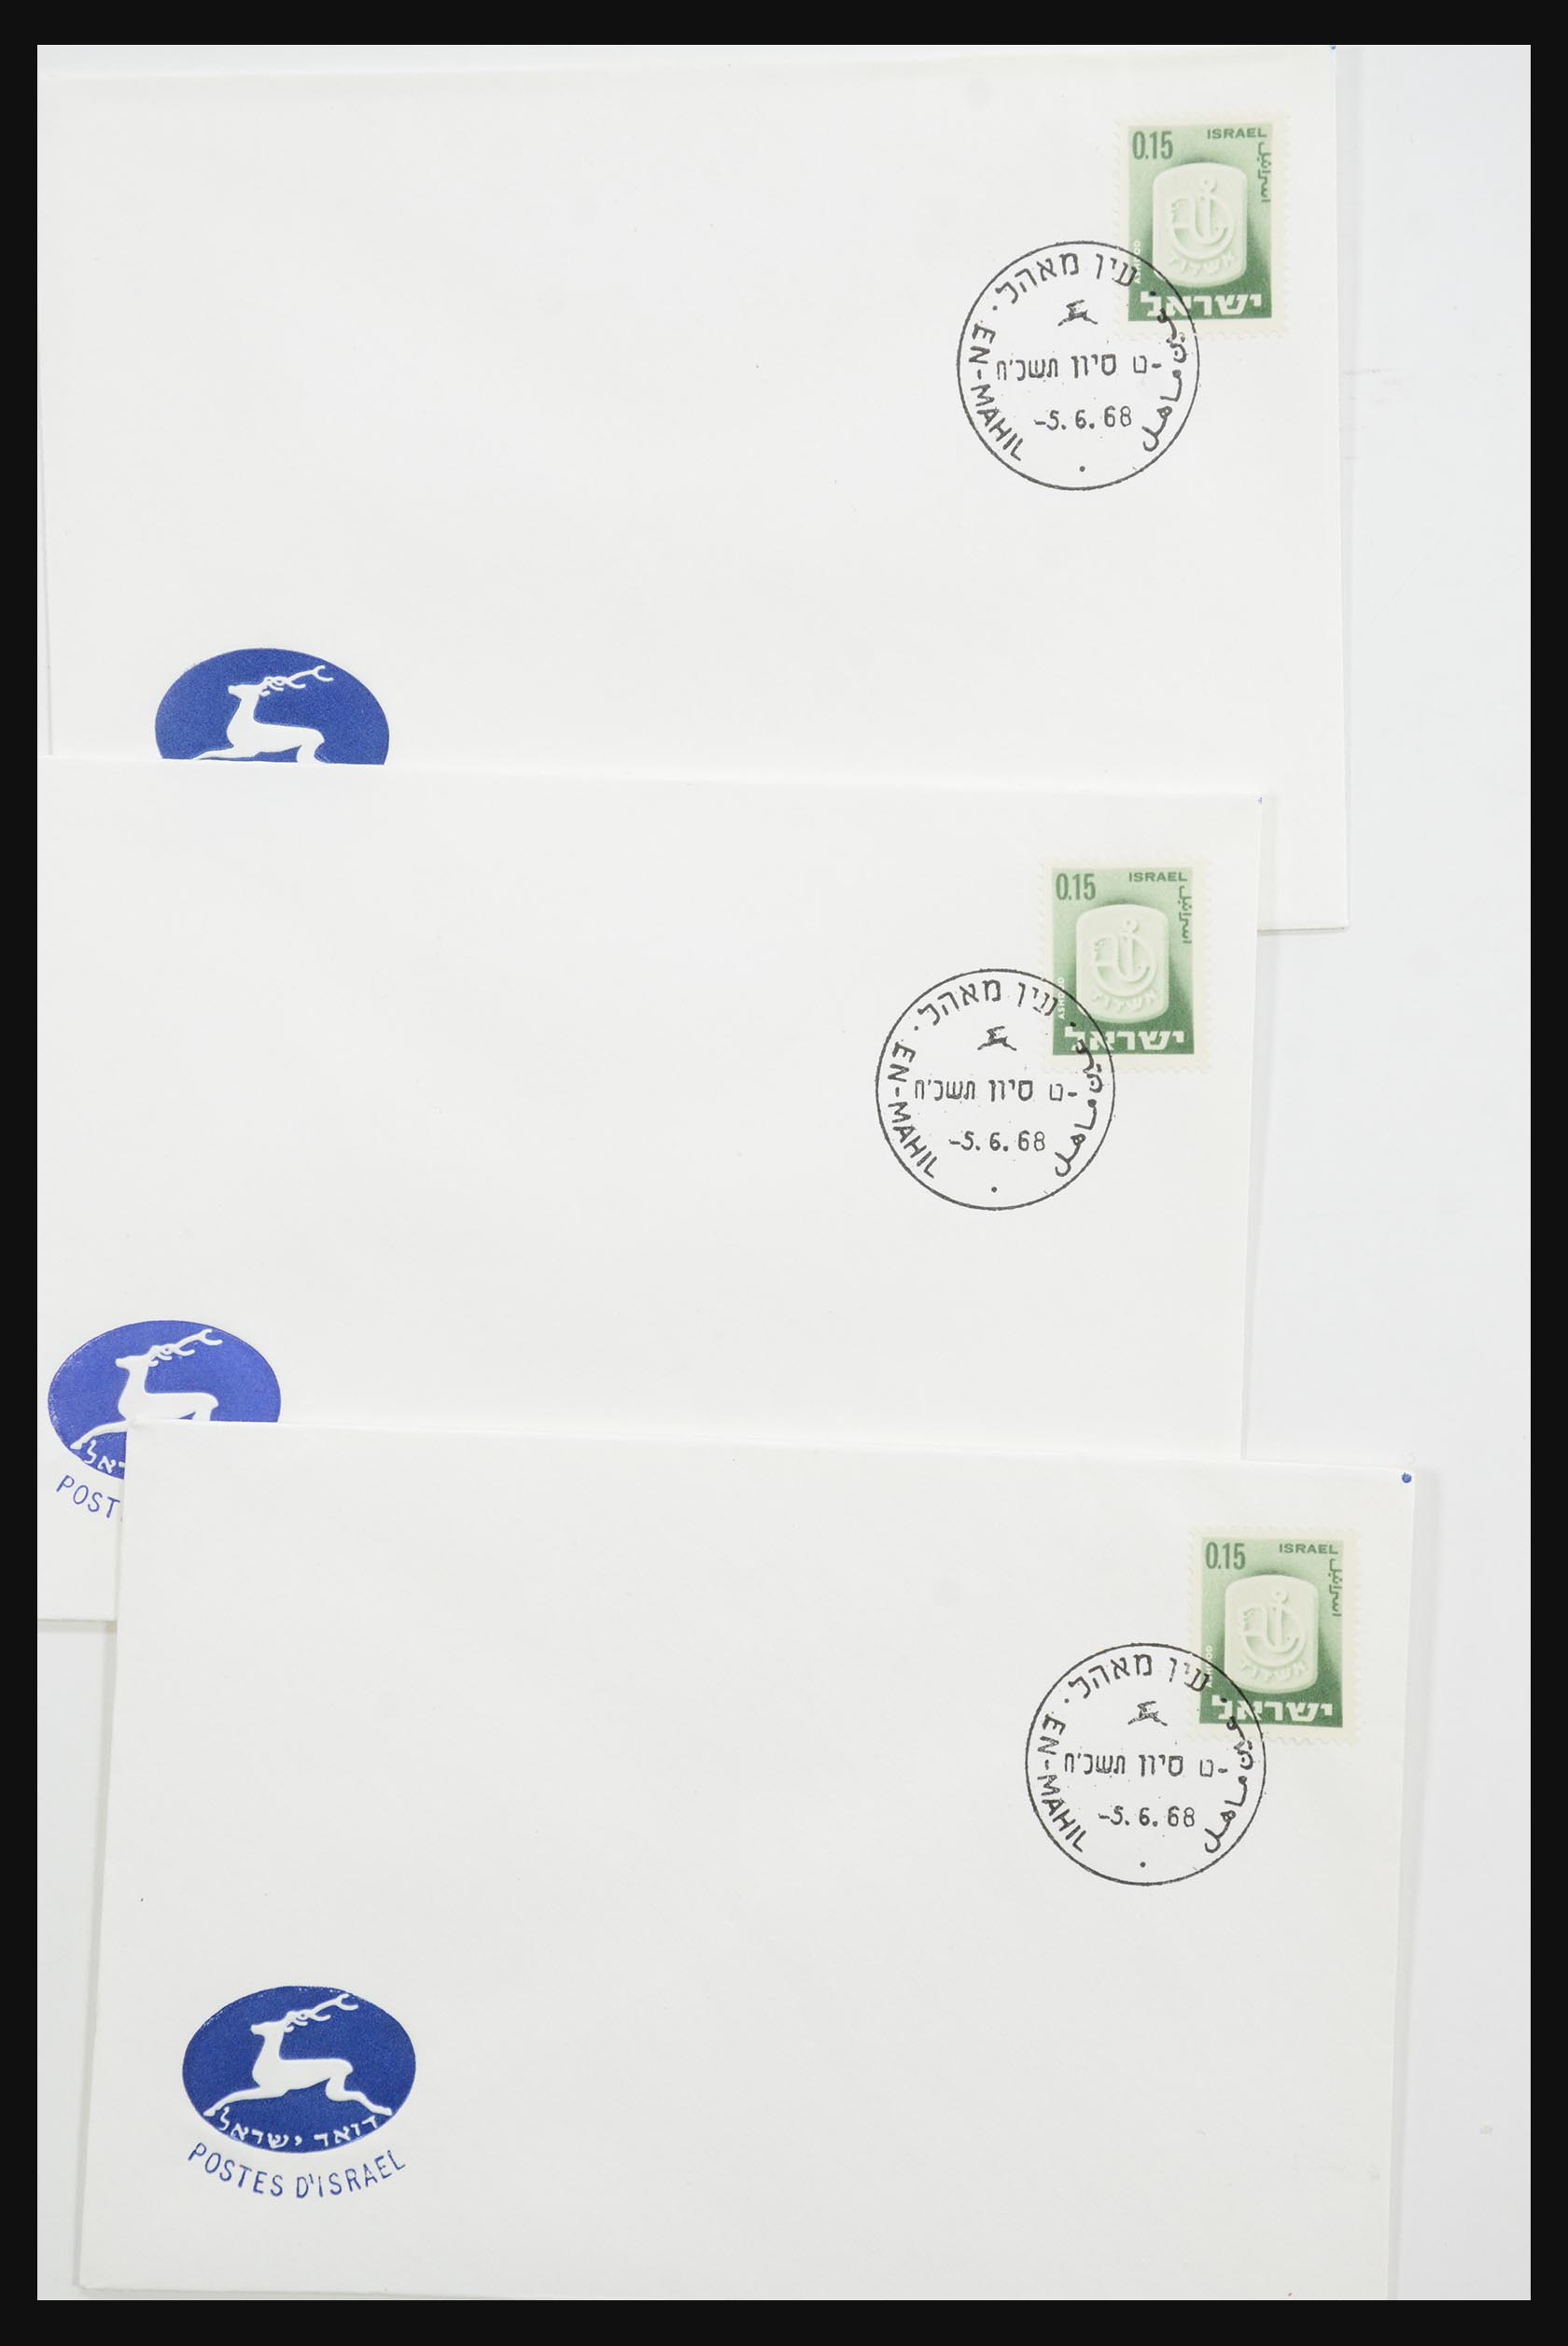 31924 087 - 31924 Israel first day cover collection 1957-2003.